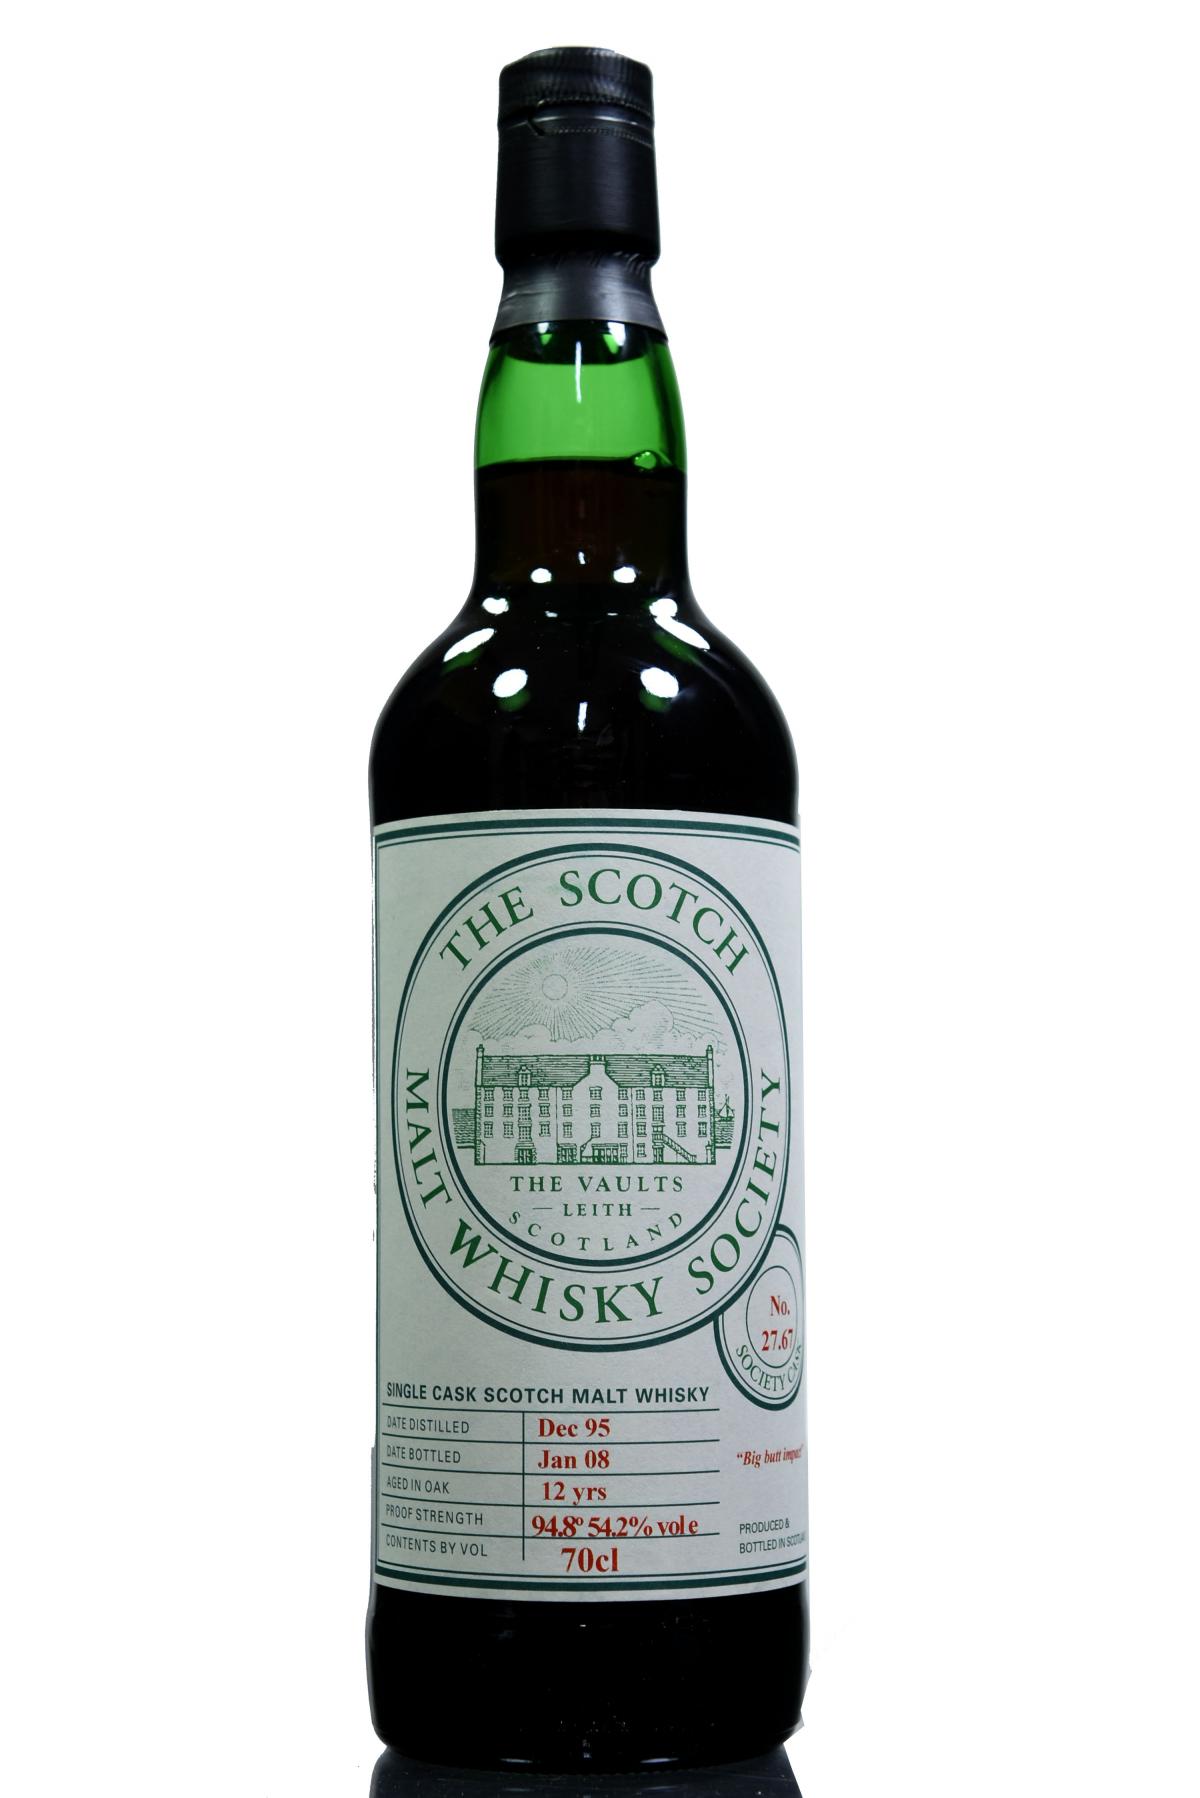 Springbank 1995-2008 - 12 Year Old - SMWS 27.67